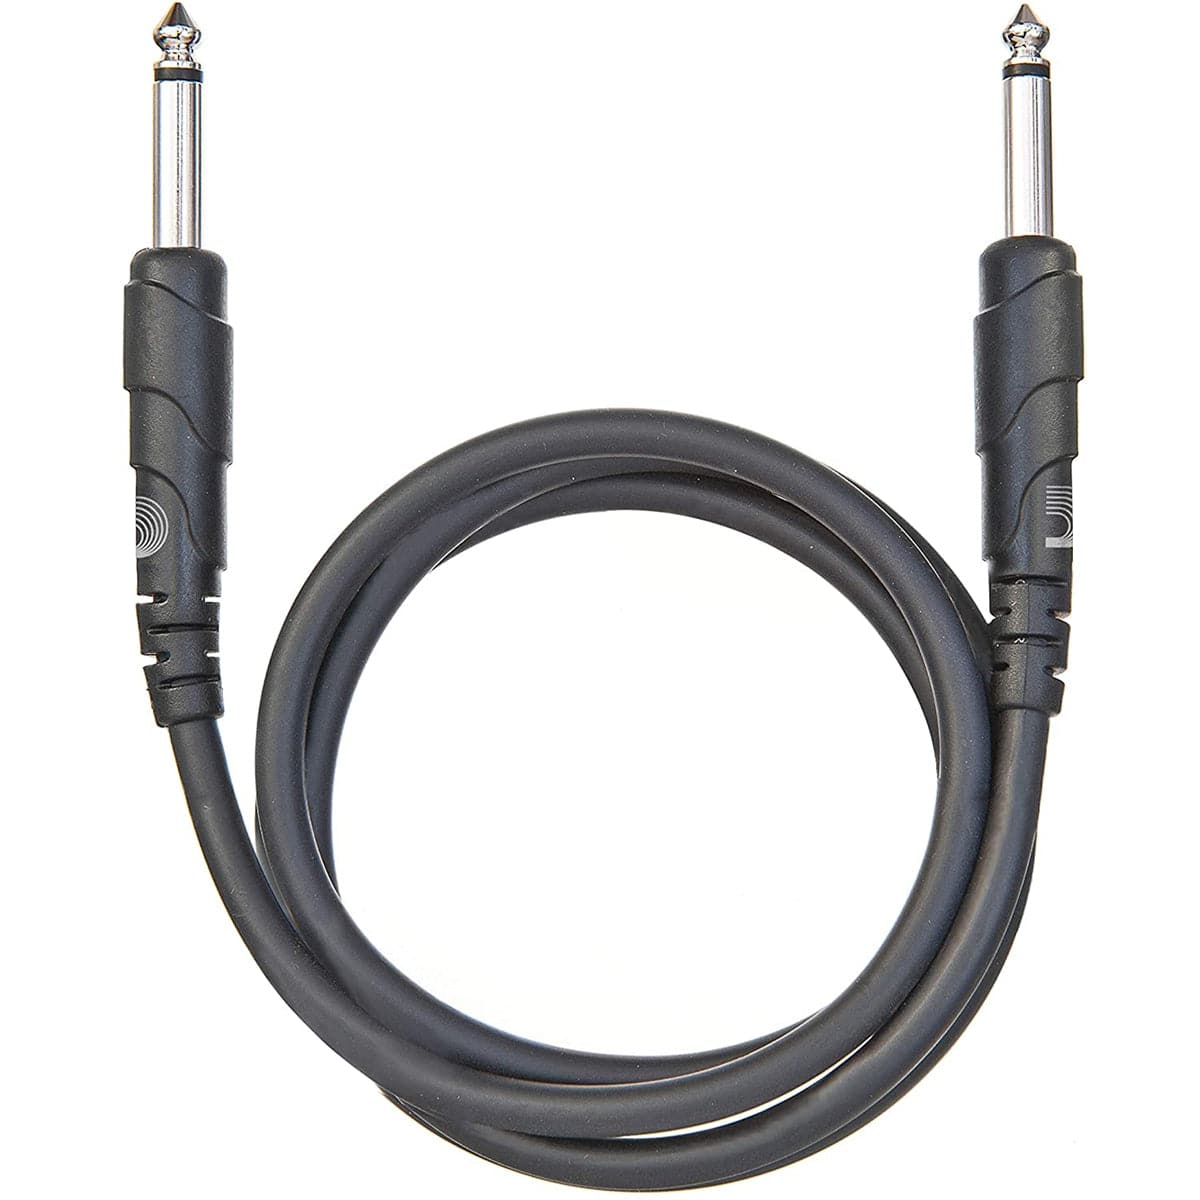 D'Addario Classic Patch Cable - 1 foot (30cm)